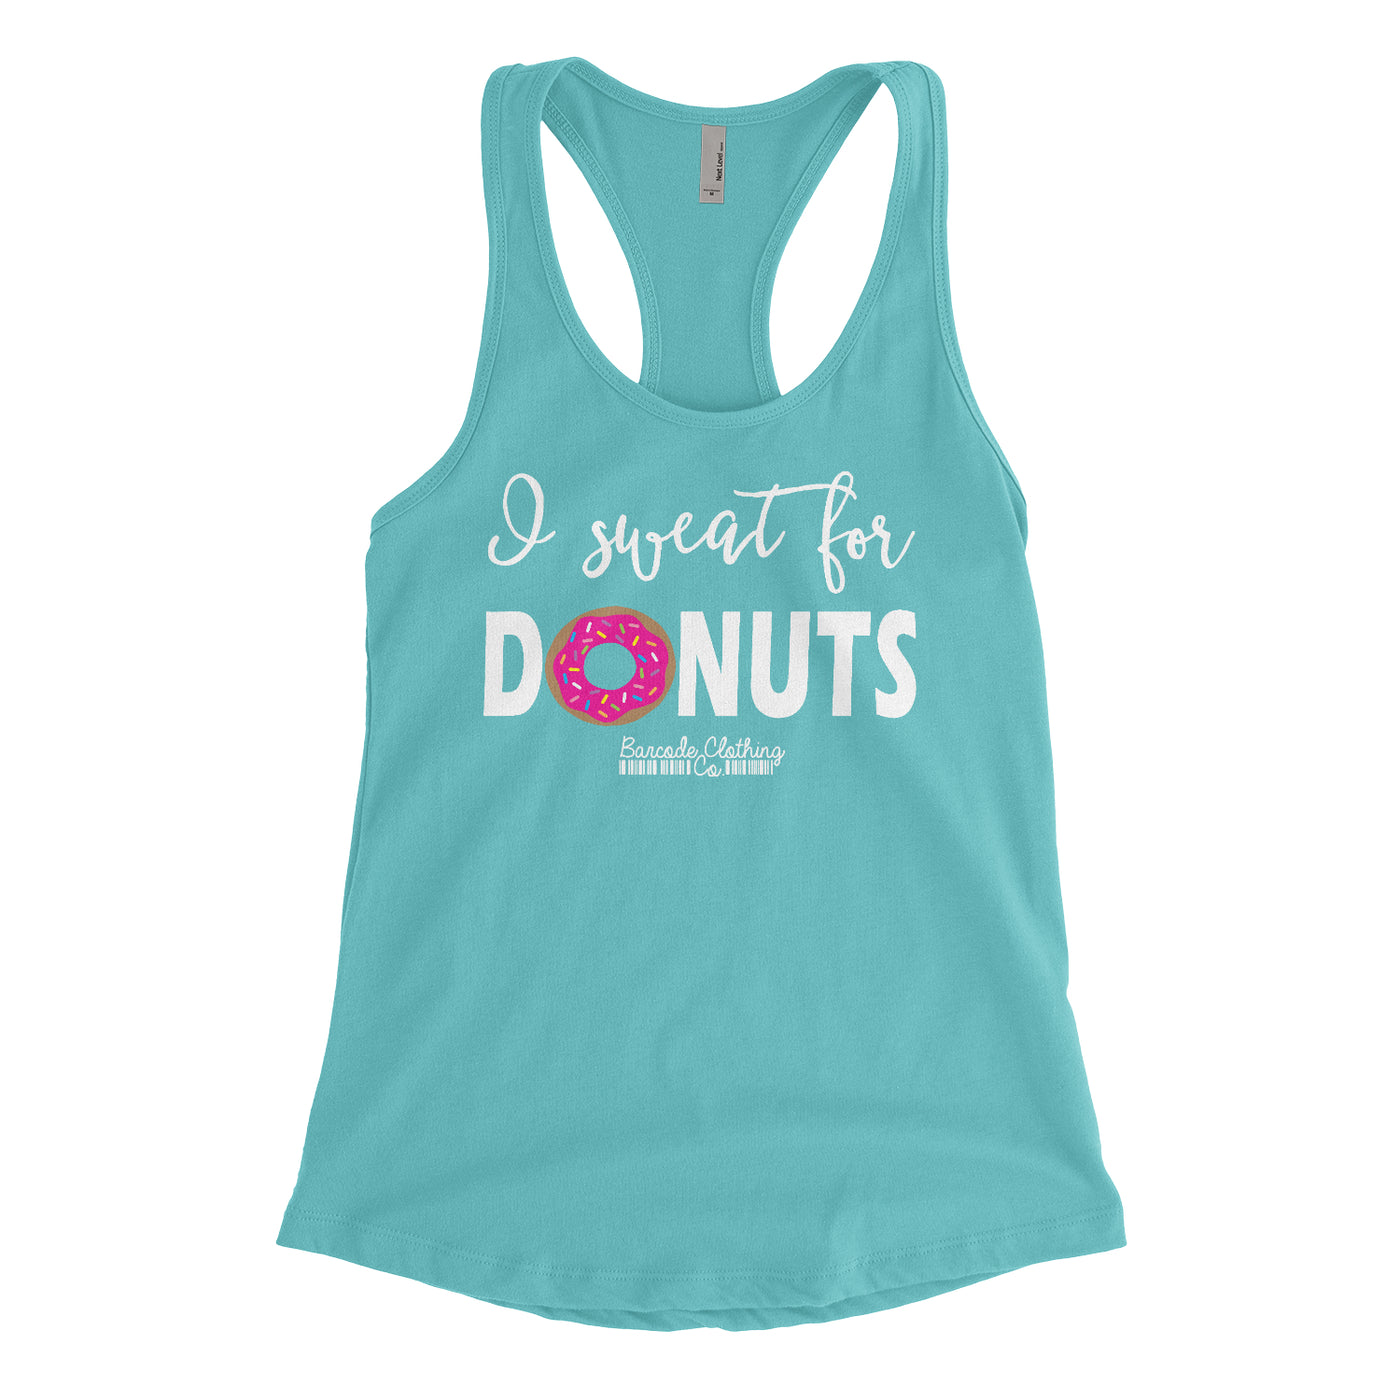 Sweat For Donuts